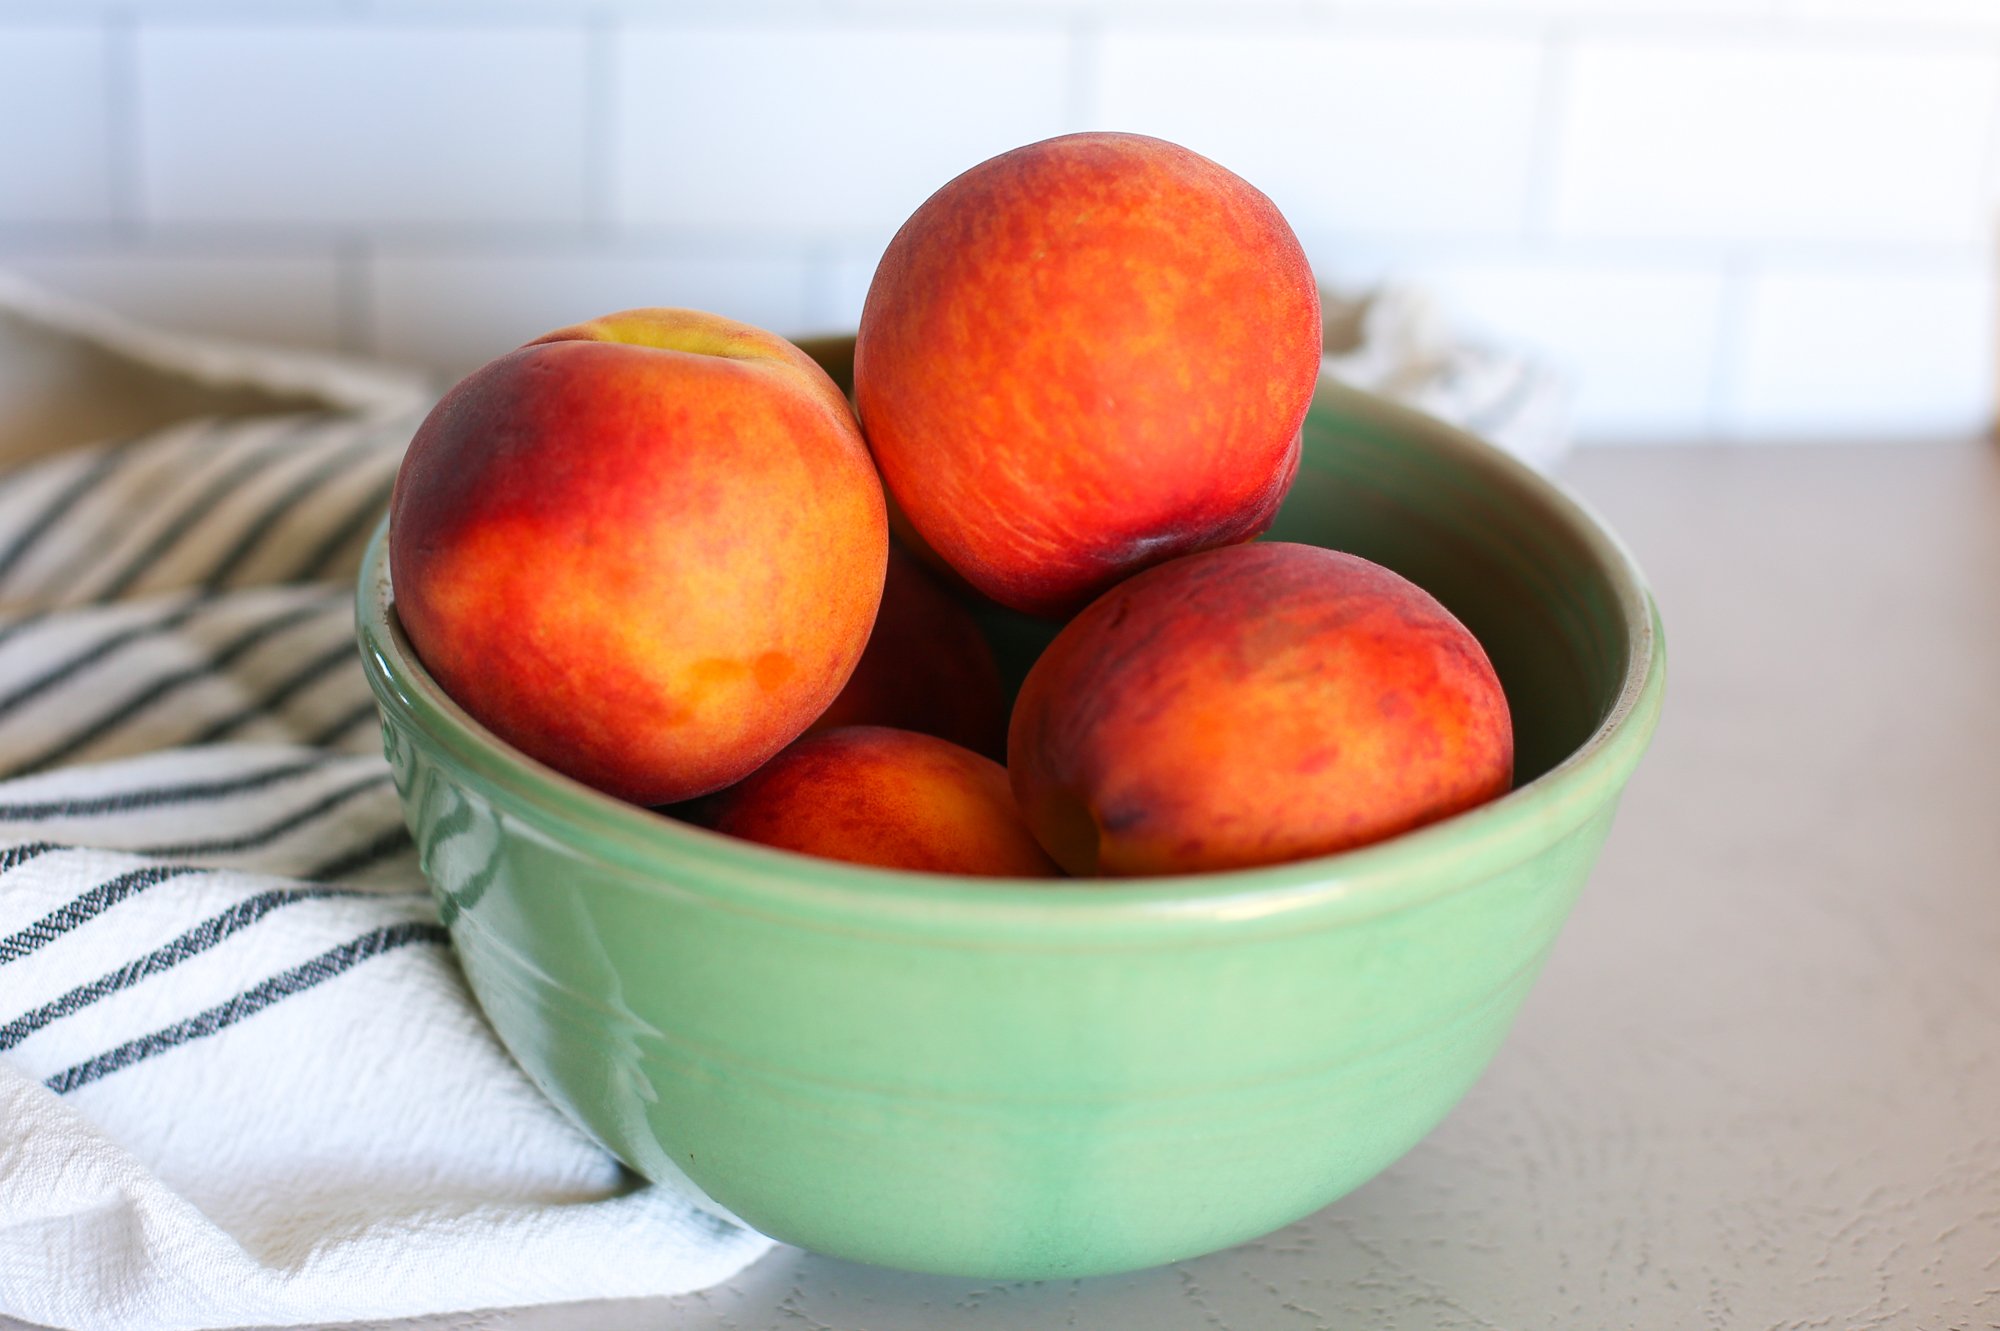 Fresh peaches in a green bowl on a countertop.